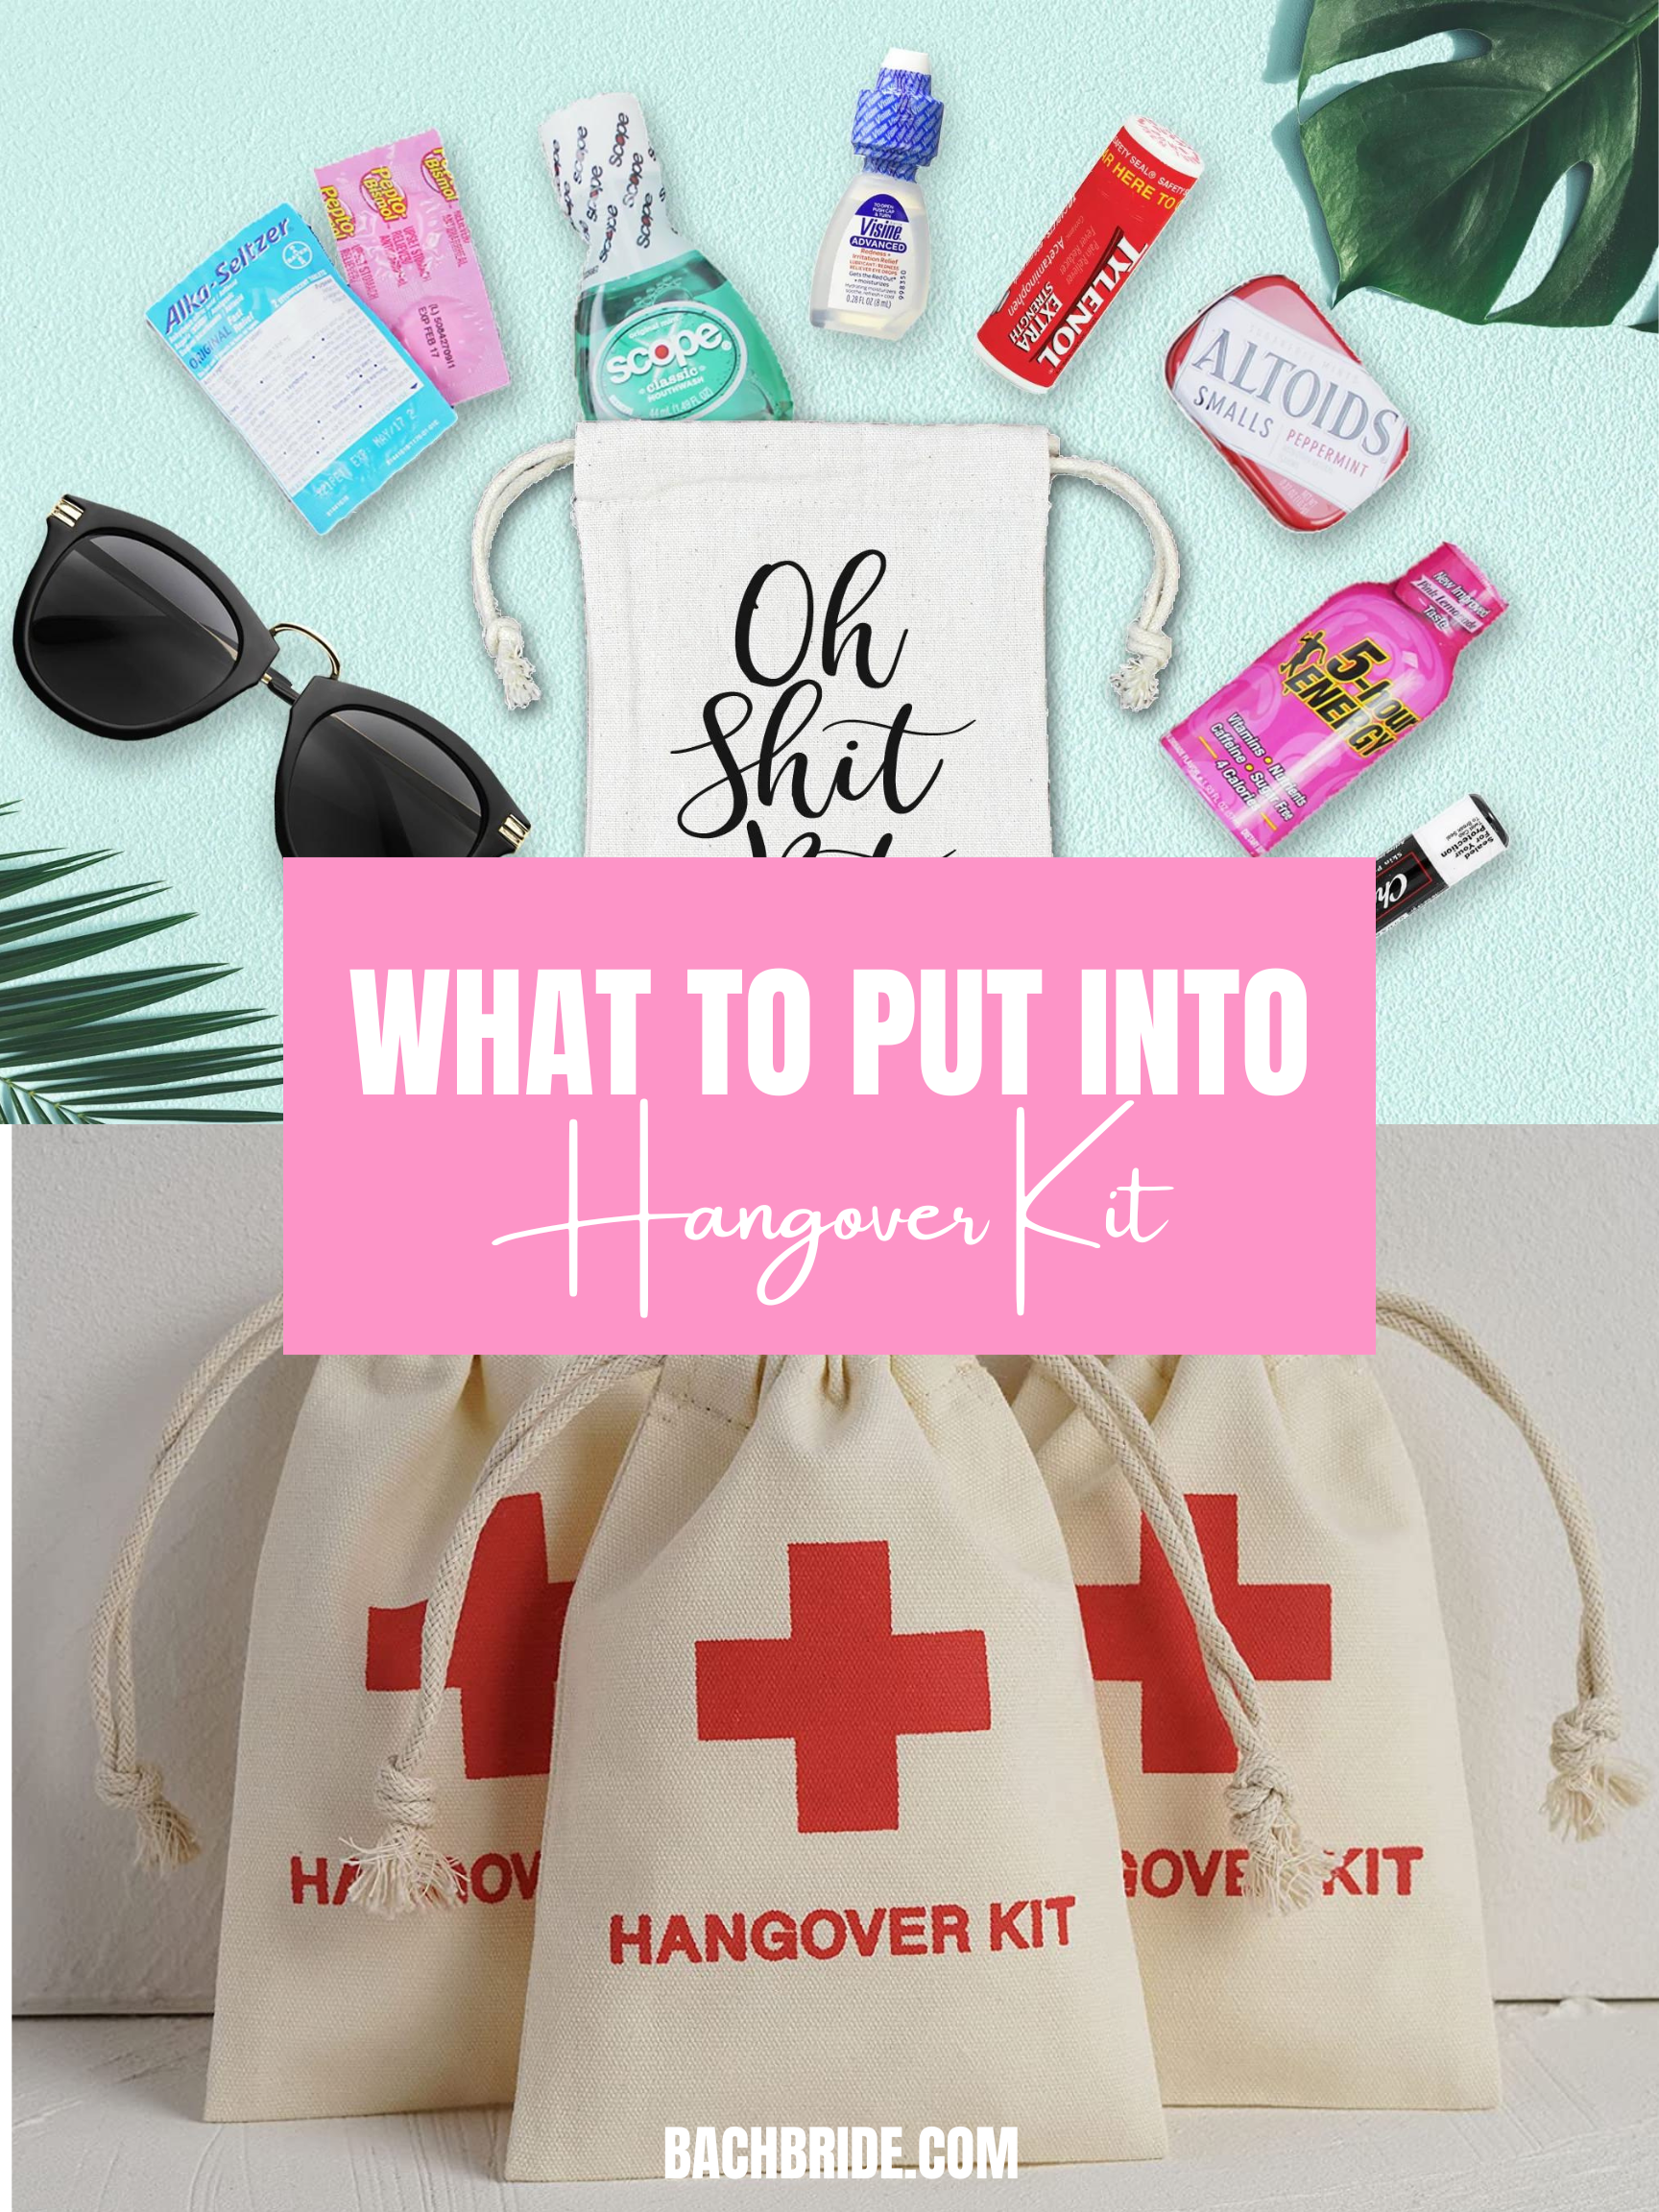 Hangover Kit Essentials - How to Make the Ultimate Hangover Kit